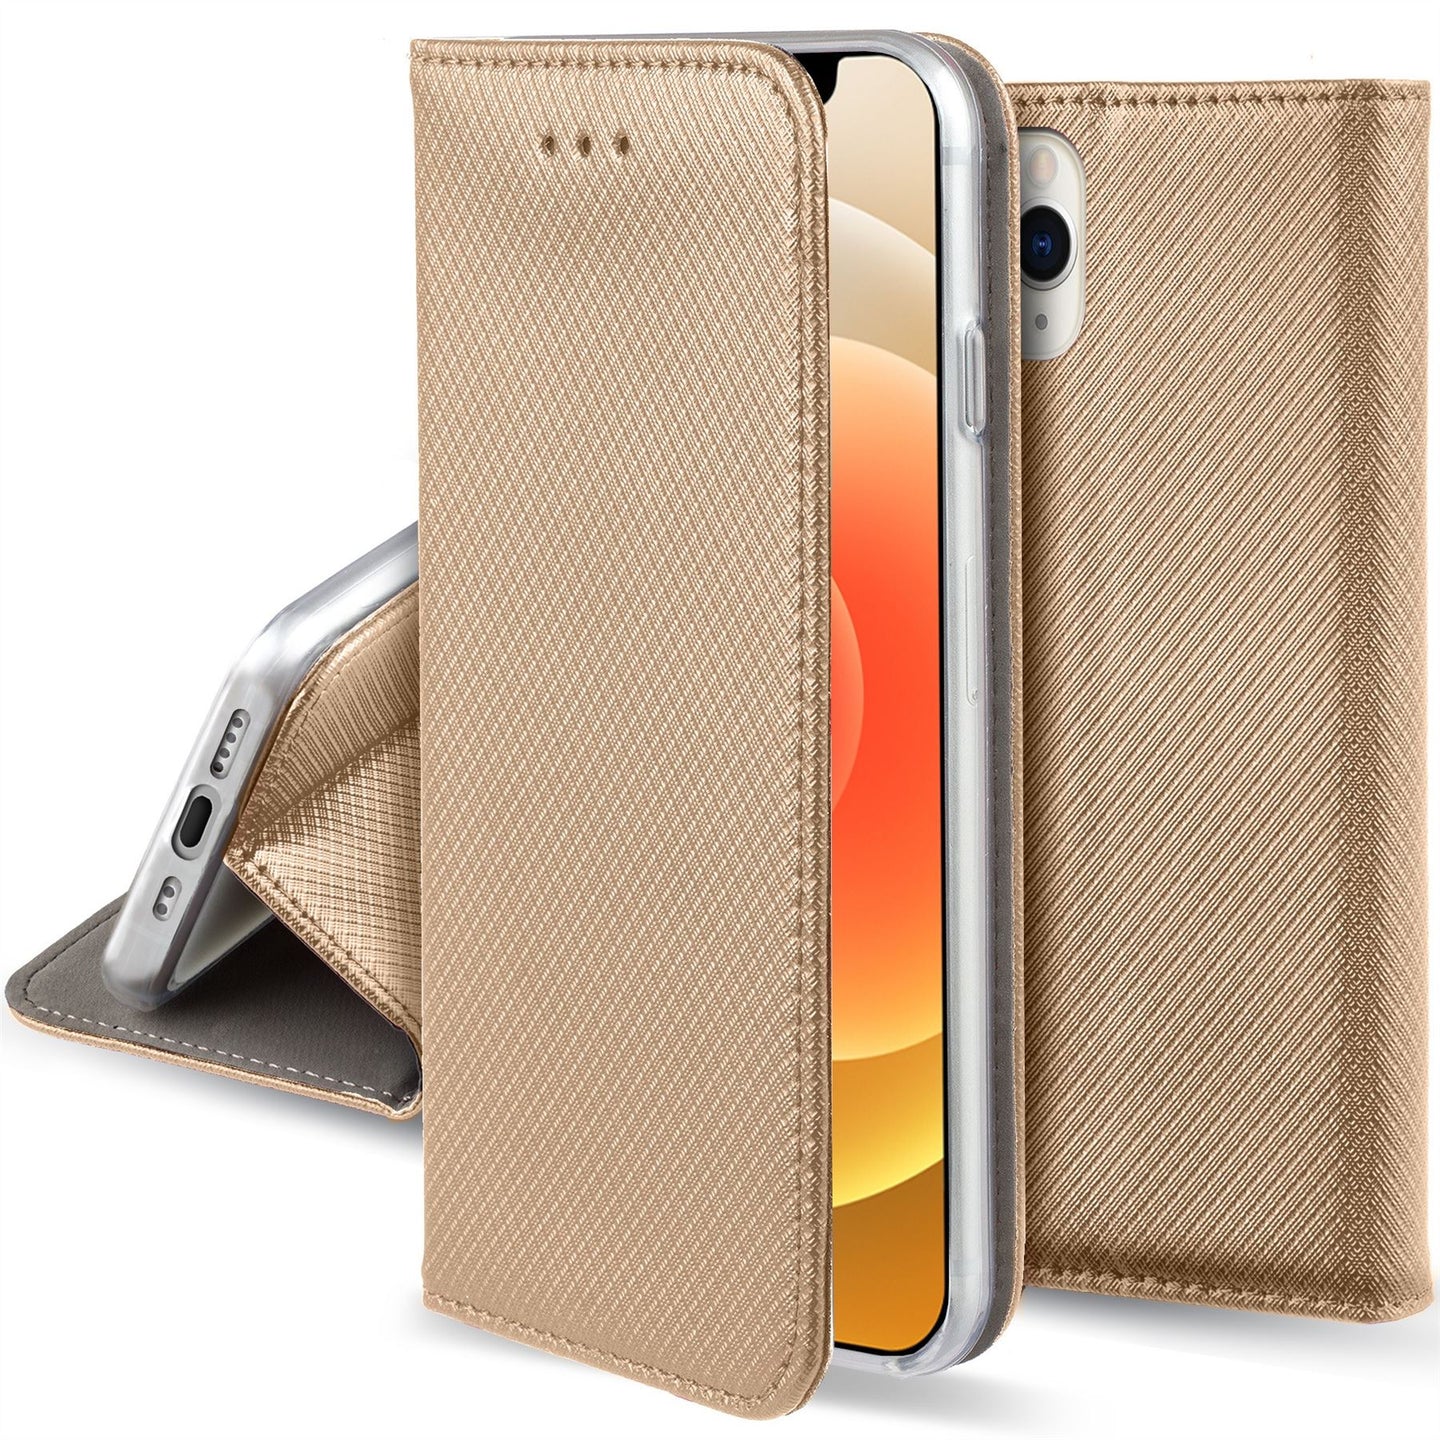 Moozy Case Flip Cover for iPhone 12 Pro Max, Gold - Smart Magnetic Flip Case with Card Holder and Stand